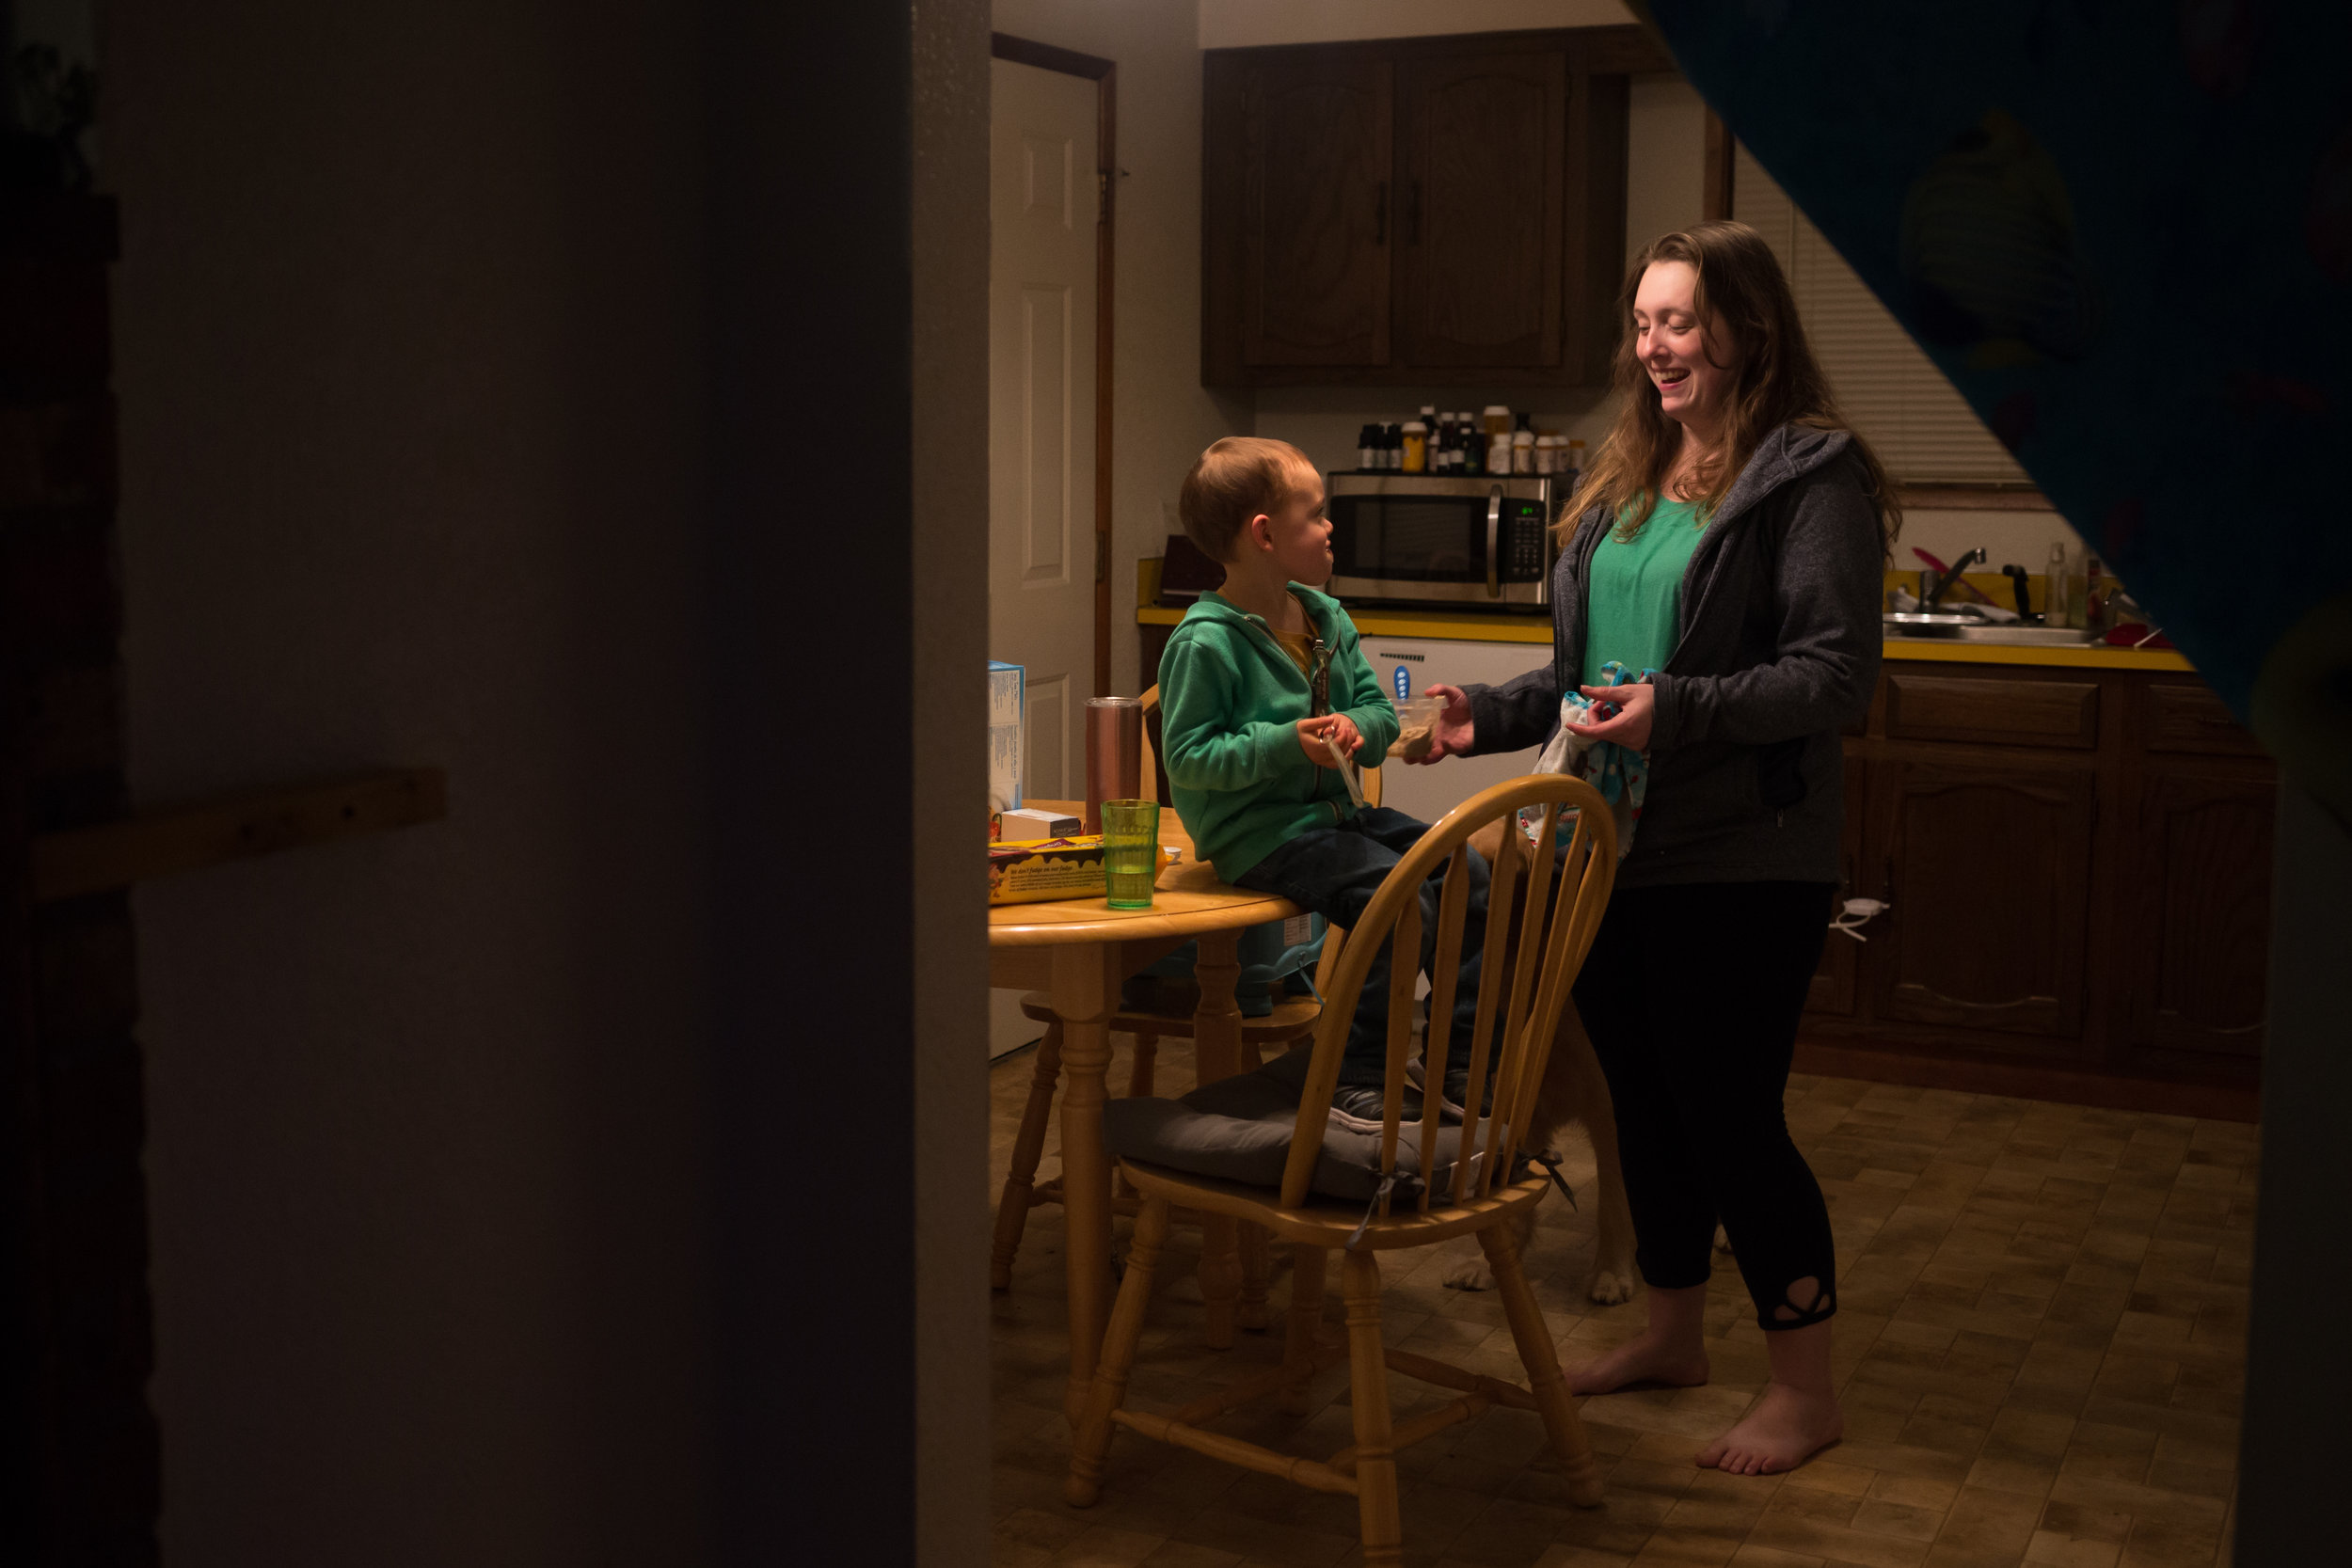  James and Paige enjoy dinner at their home in Springfield, Oregon. Paige, a single mom,&nbsp;works two jobs as a an inventory manager and production worker at a local warehouse to support her family.&nbsp; 